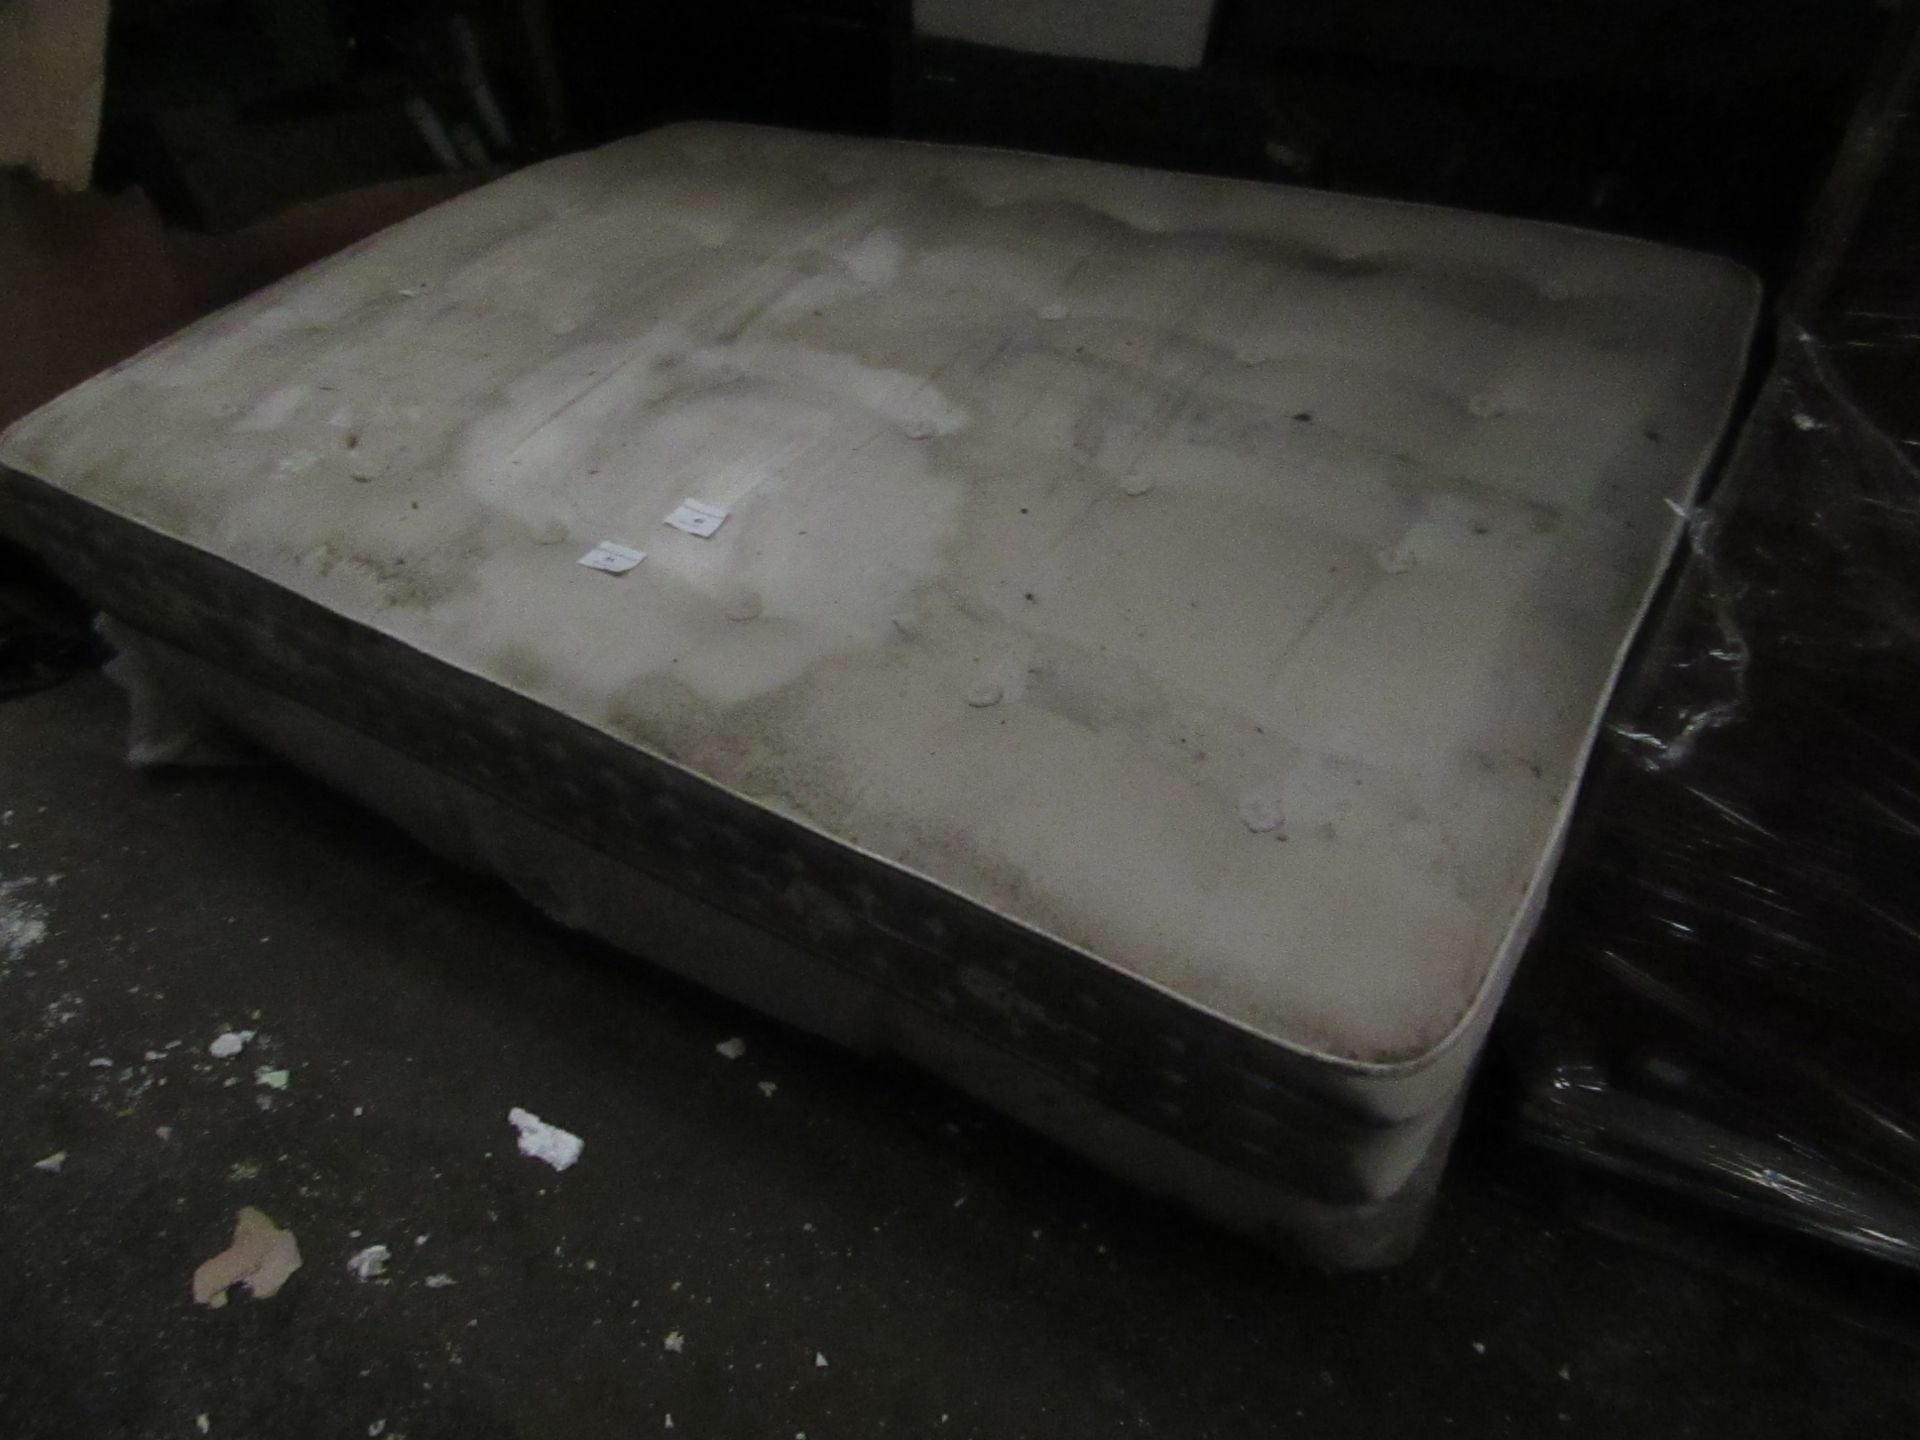 2x Swoon King Size mattresses, extremely dirty from being stored and dropped in a dirty warehouse